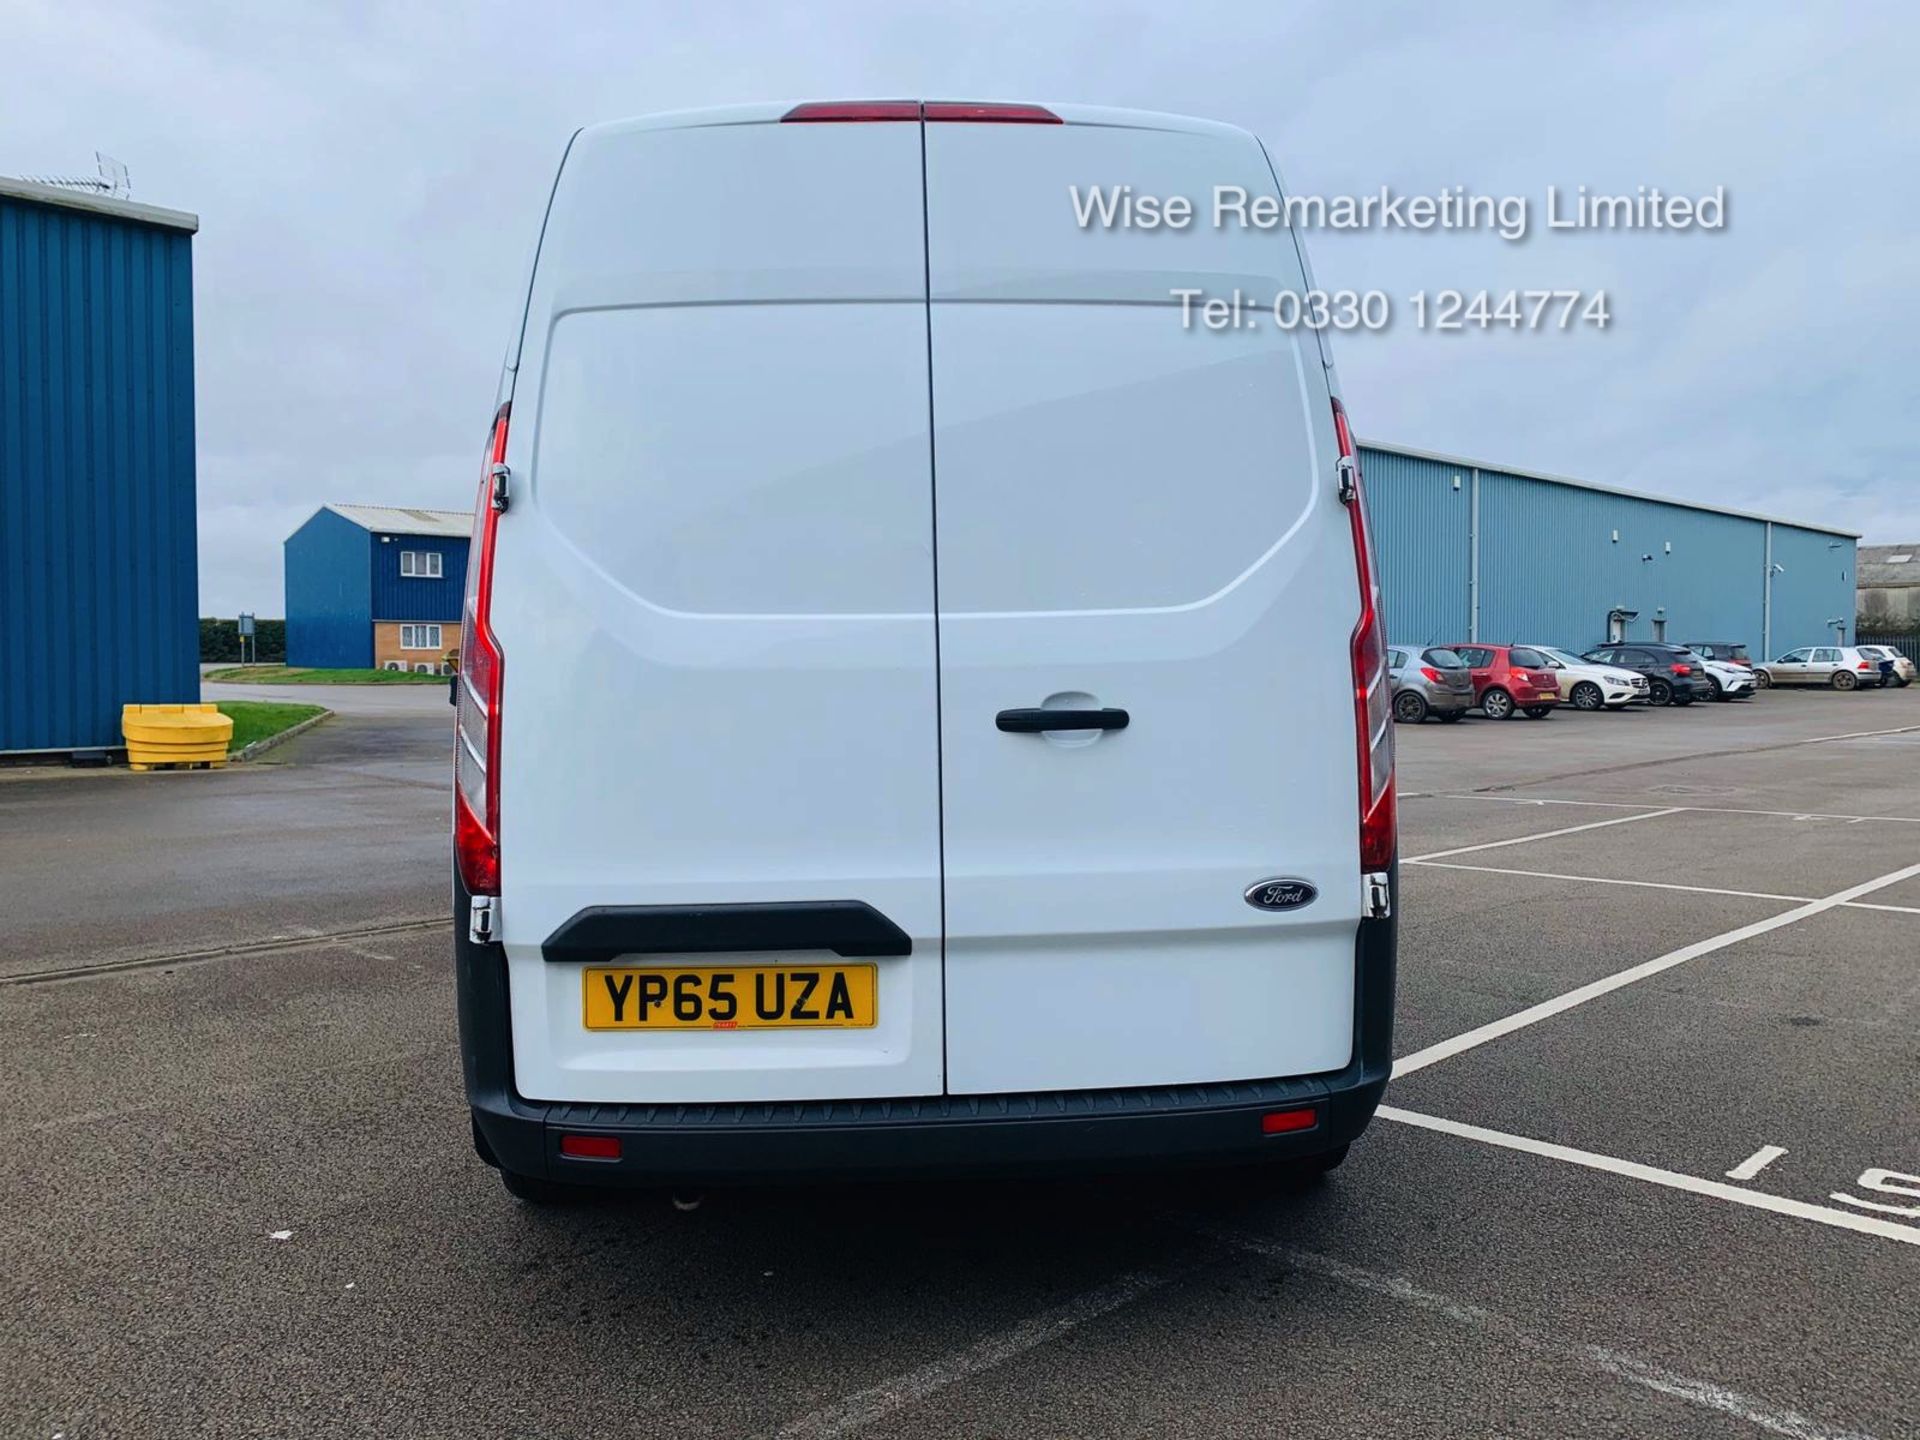 (RESERVE MET) Ford Transit Custom 2.2 TDCI 290 **HIGH ROOF** - 2016 Model - AIR CON- 1 OWNER- FSH- - Image 8 of 24